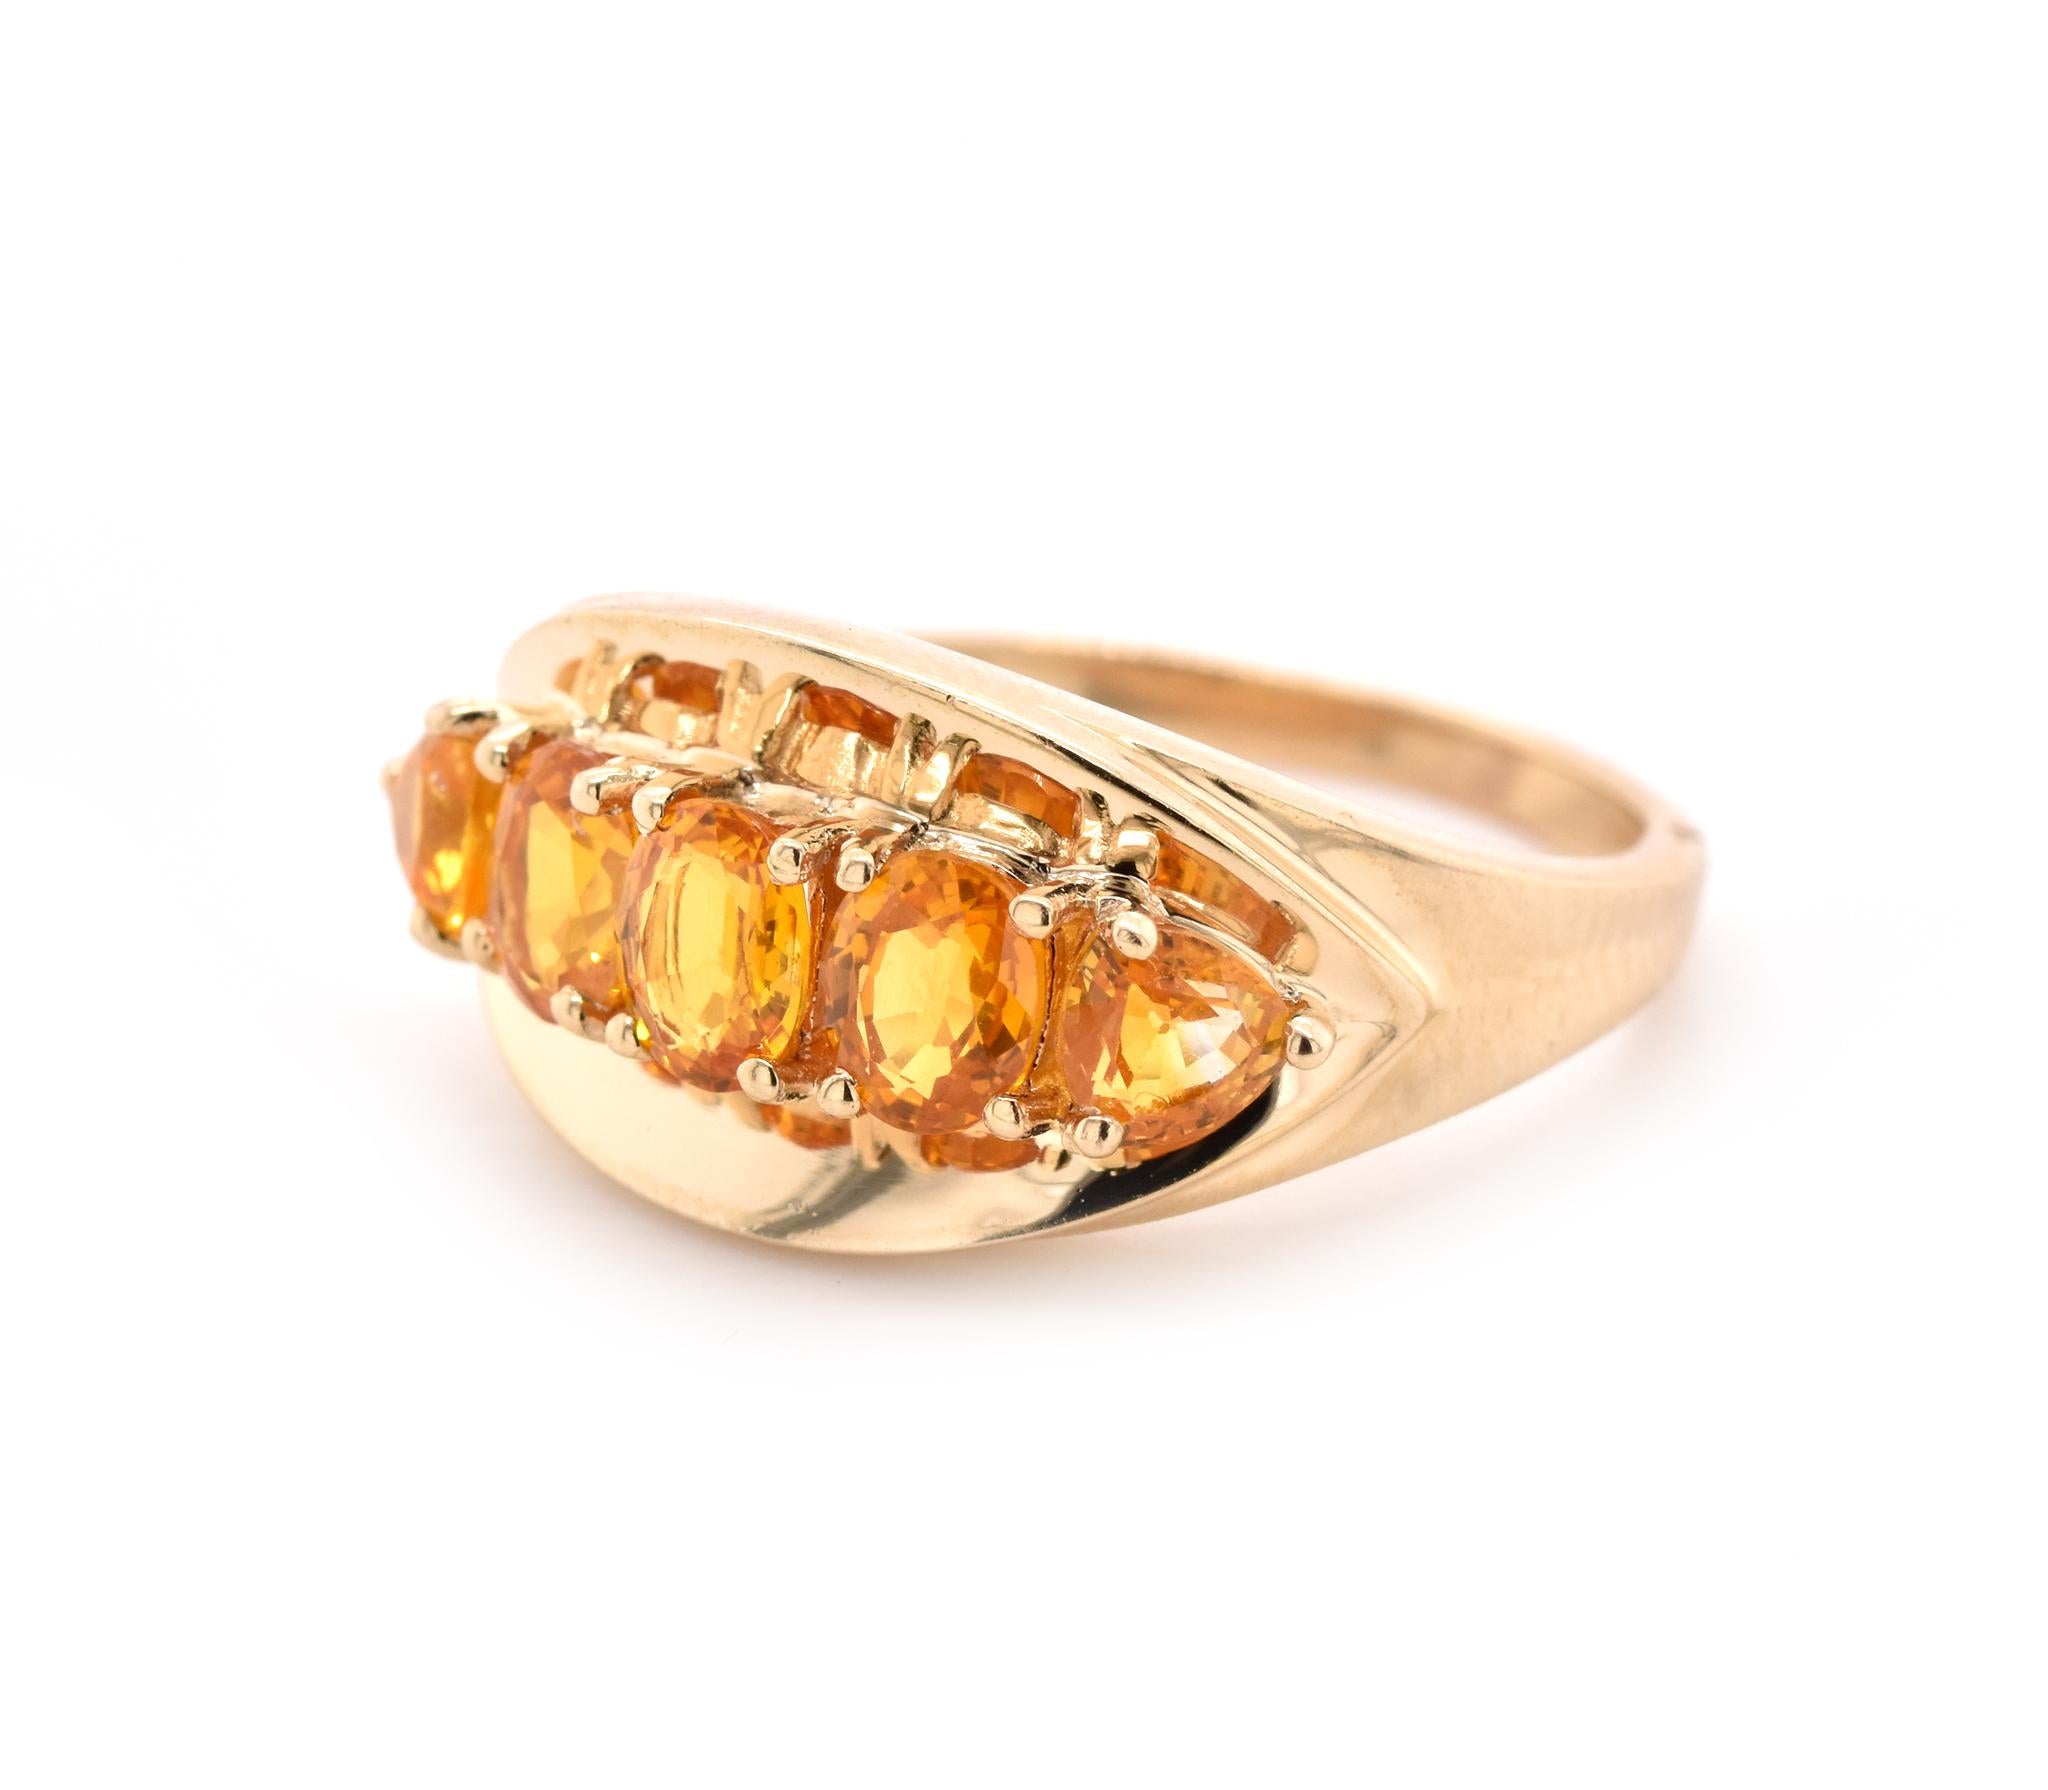 Designer: custom design
Material: 14k yellow gold
Gemstones: citrine 
Ring Size: 6 (please allow two additional shipping days for sizing requests)
Dimensions: ring top measures 9.85mm x 19.20mm
Weight: 3.6 grams
